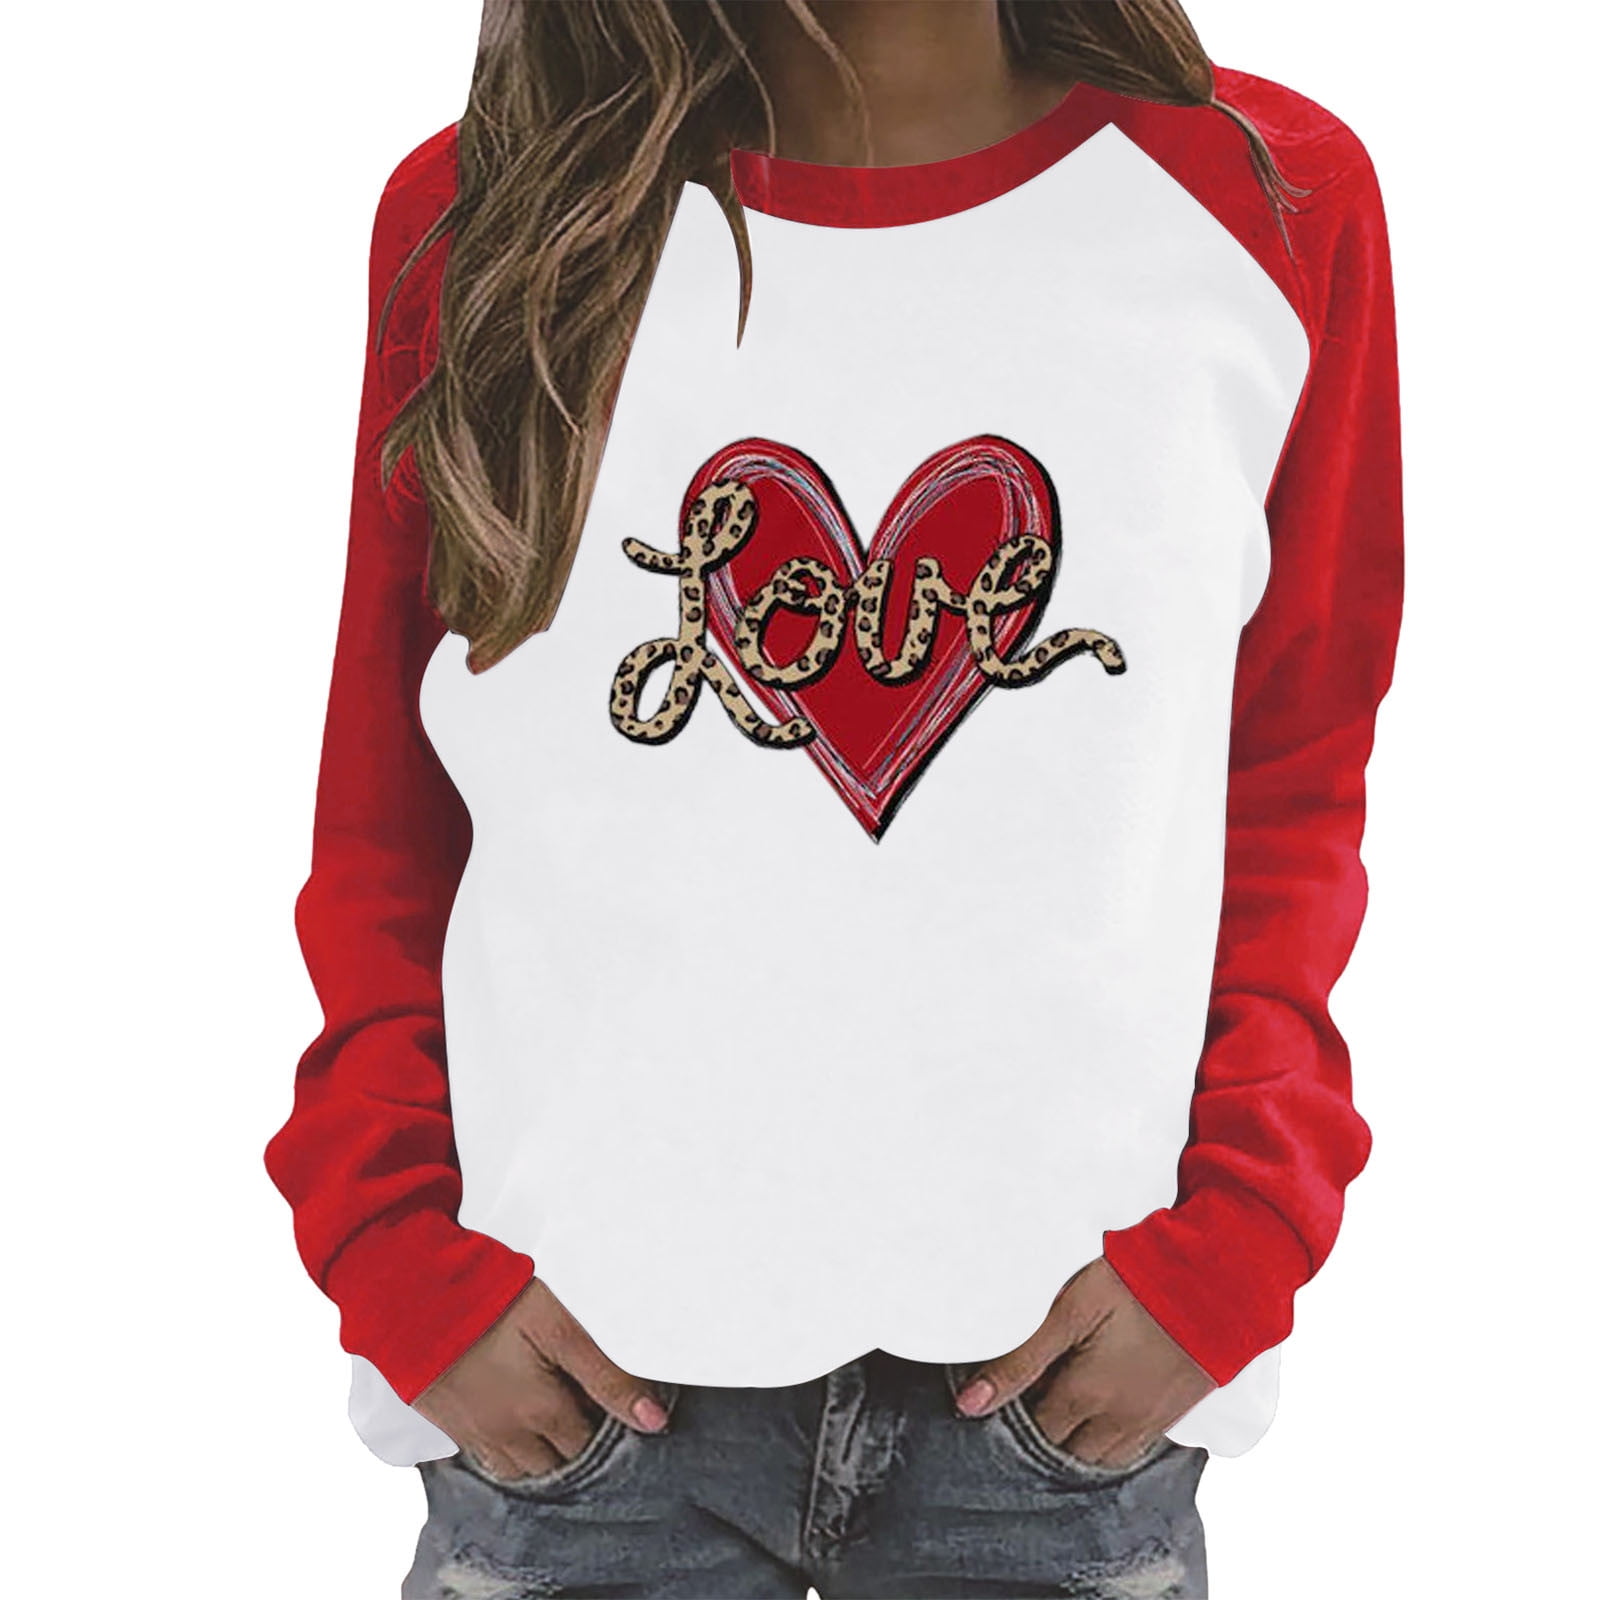 Beppter Womens Tops Love Printed Round Neck Raglan Long Sleeve Tee Shirt  Top Valentine's Day S White